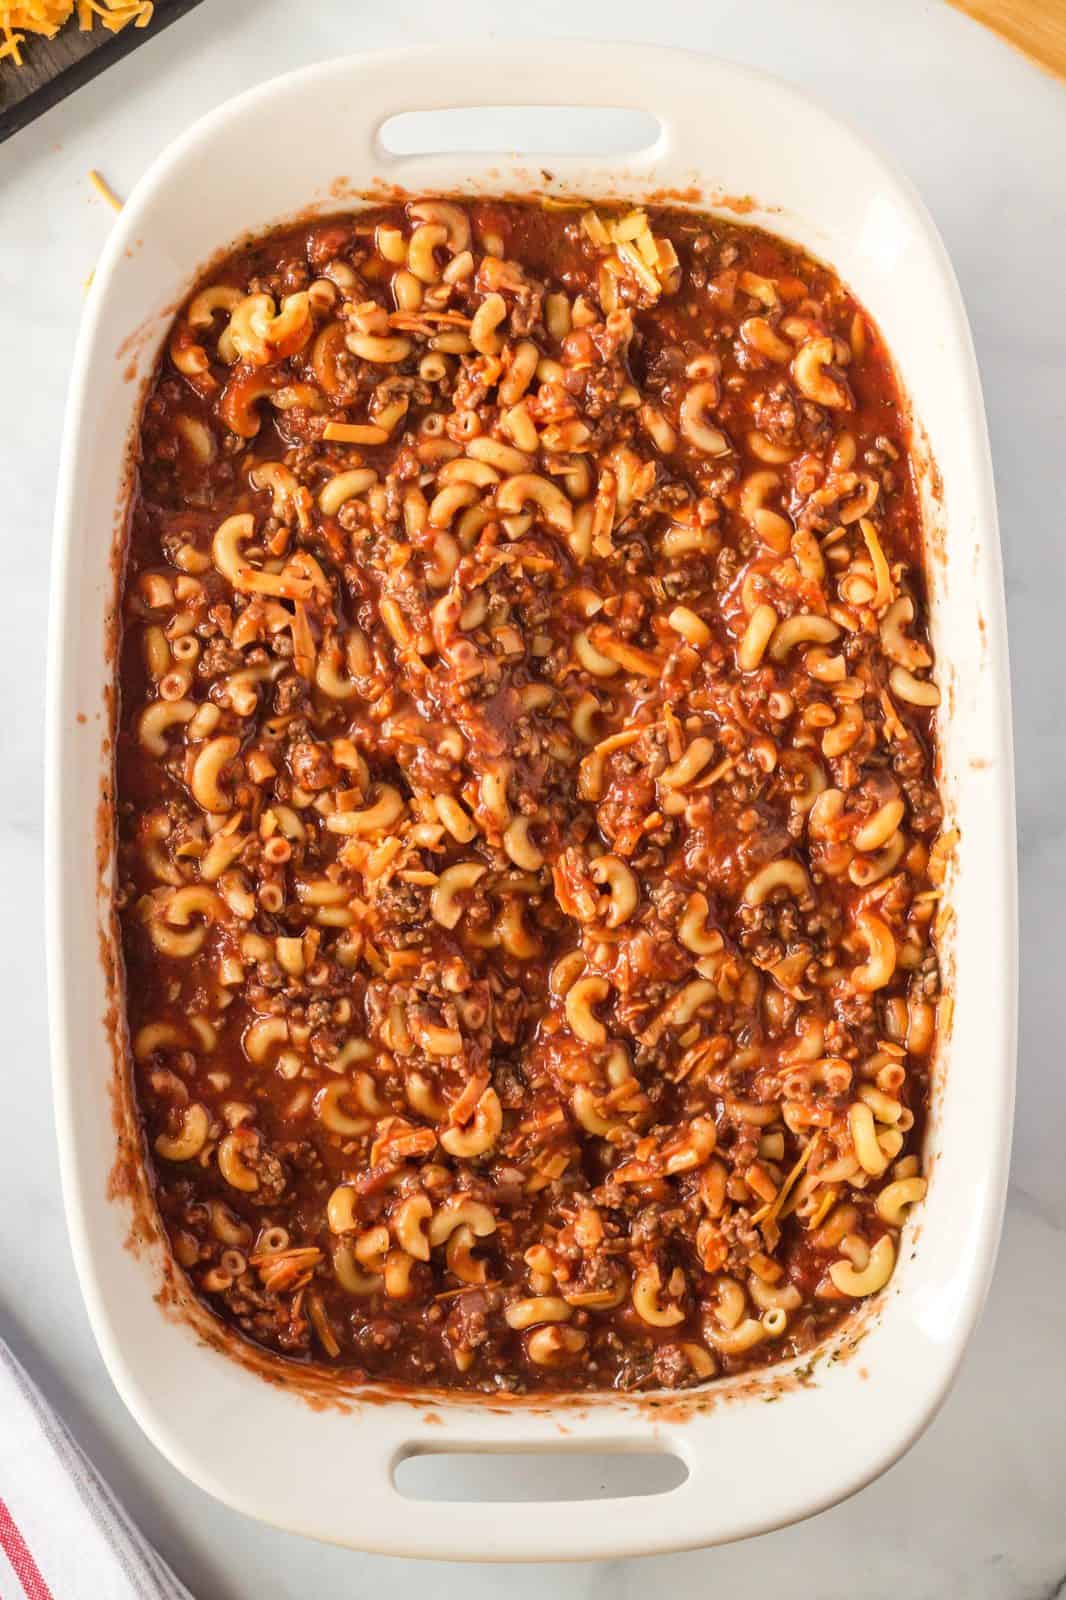 Ground beef mixture with cheese and pasta added to baking dish.